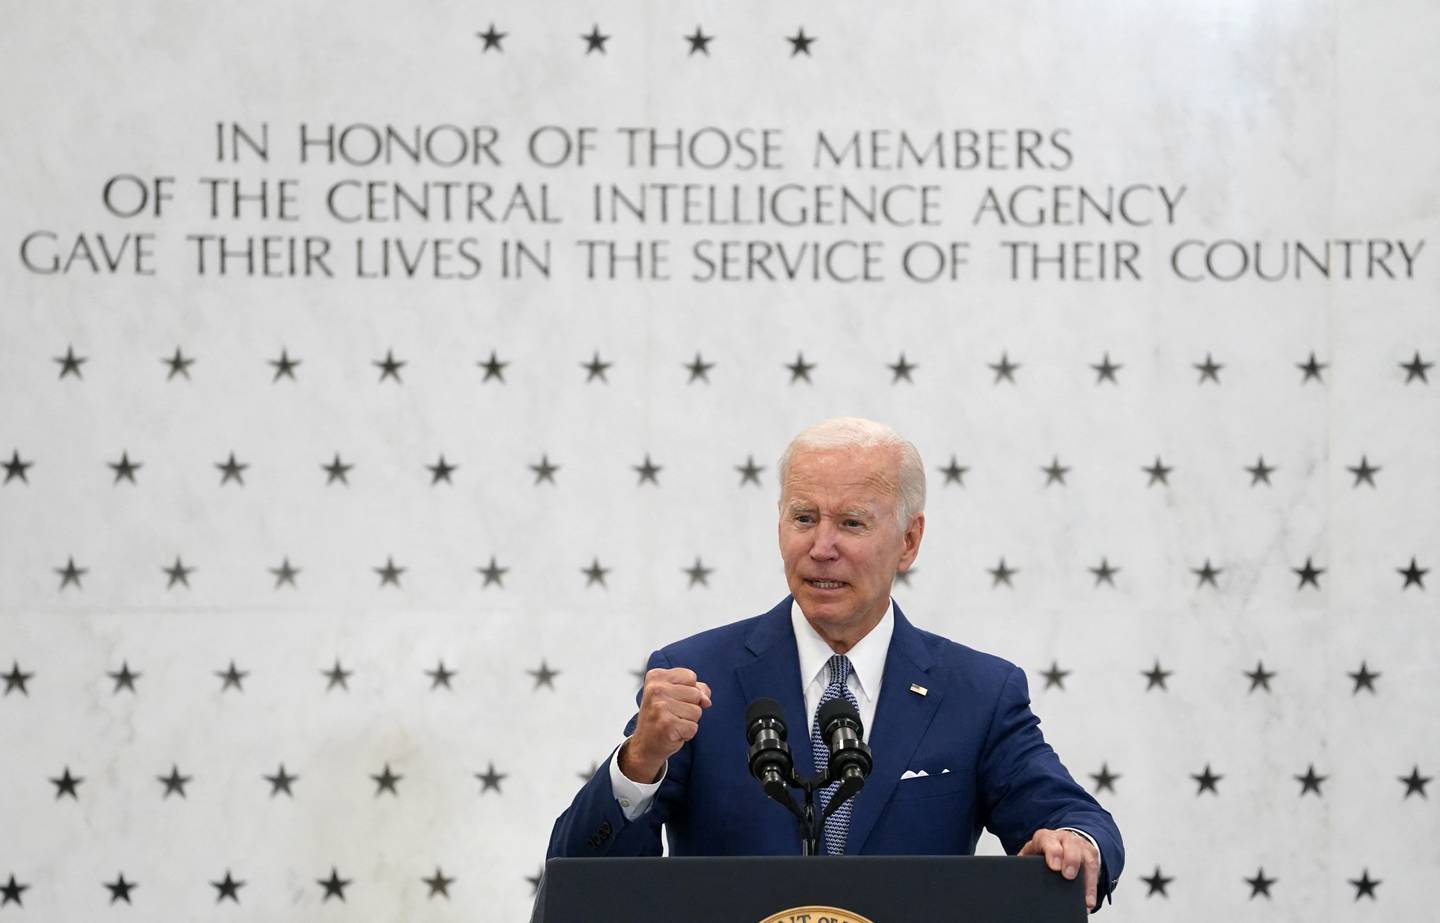 President Joe Biden speaks to Central Intelligence Agency employees in front of the Memorial Wall during his visit to CIA Headquarters in Langley, Virginia. Reuters